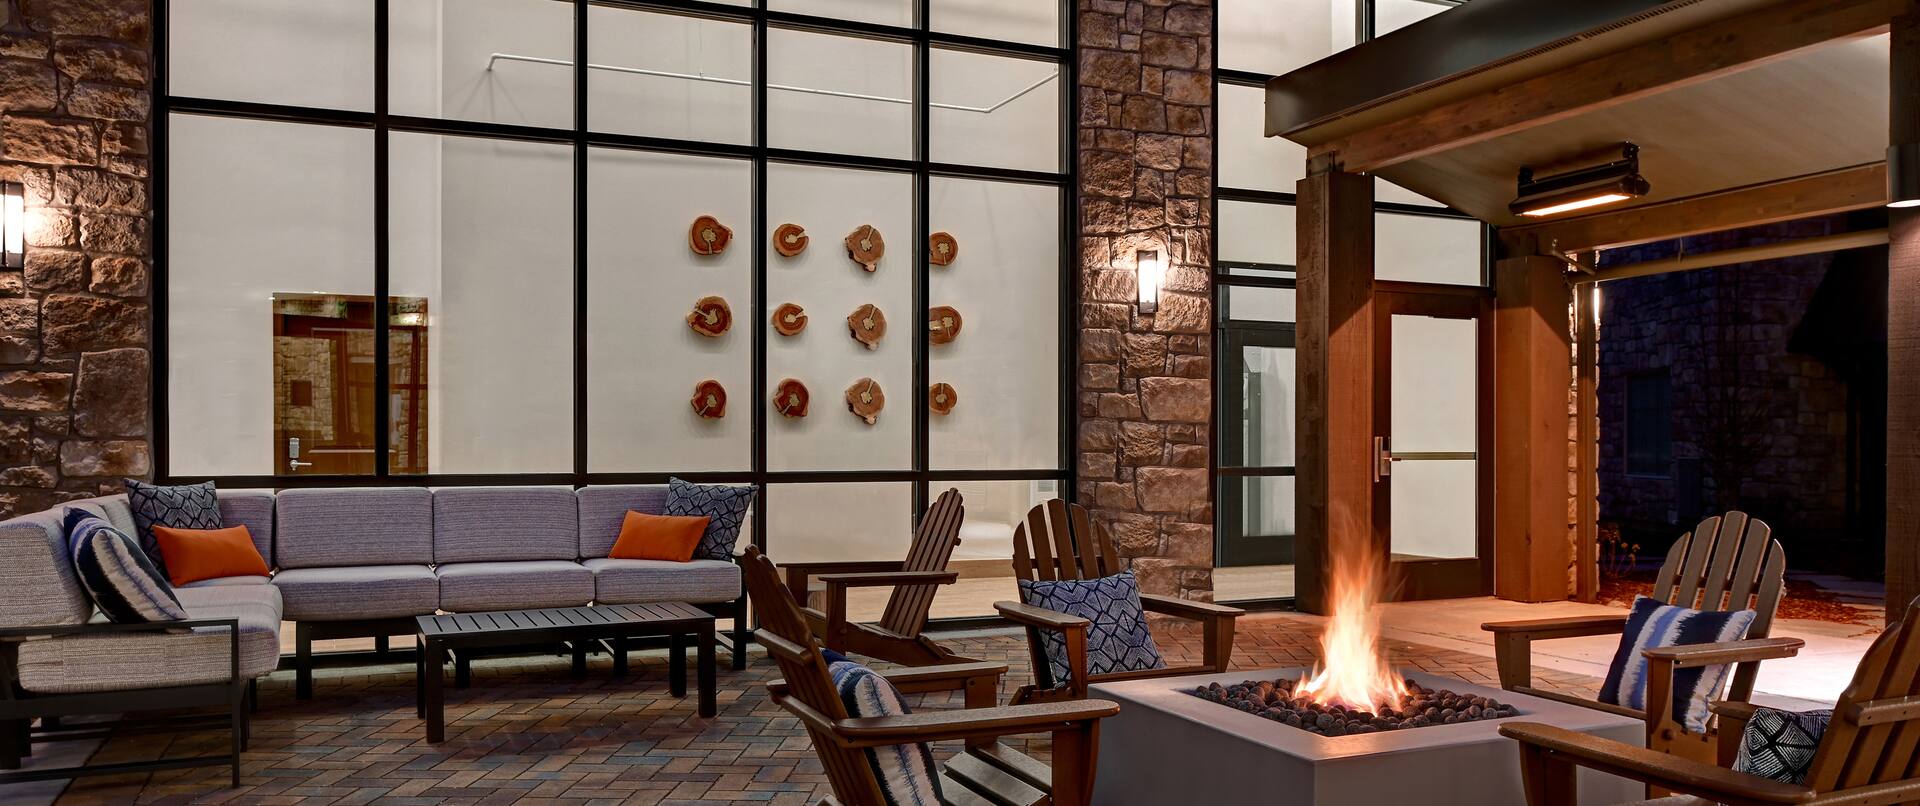 exterior patio with seating and fire pit